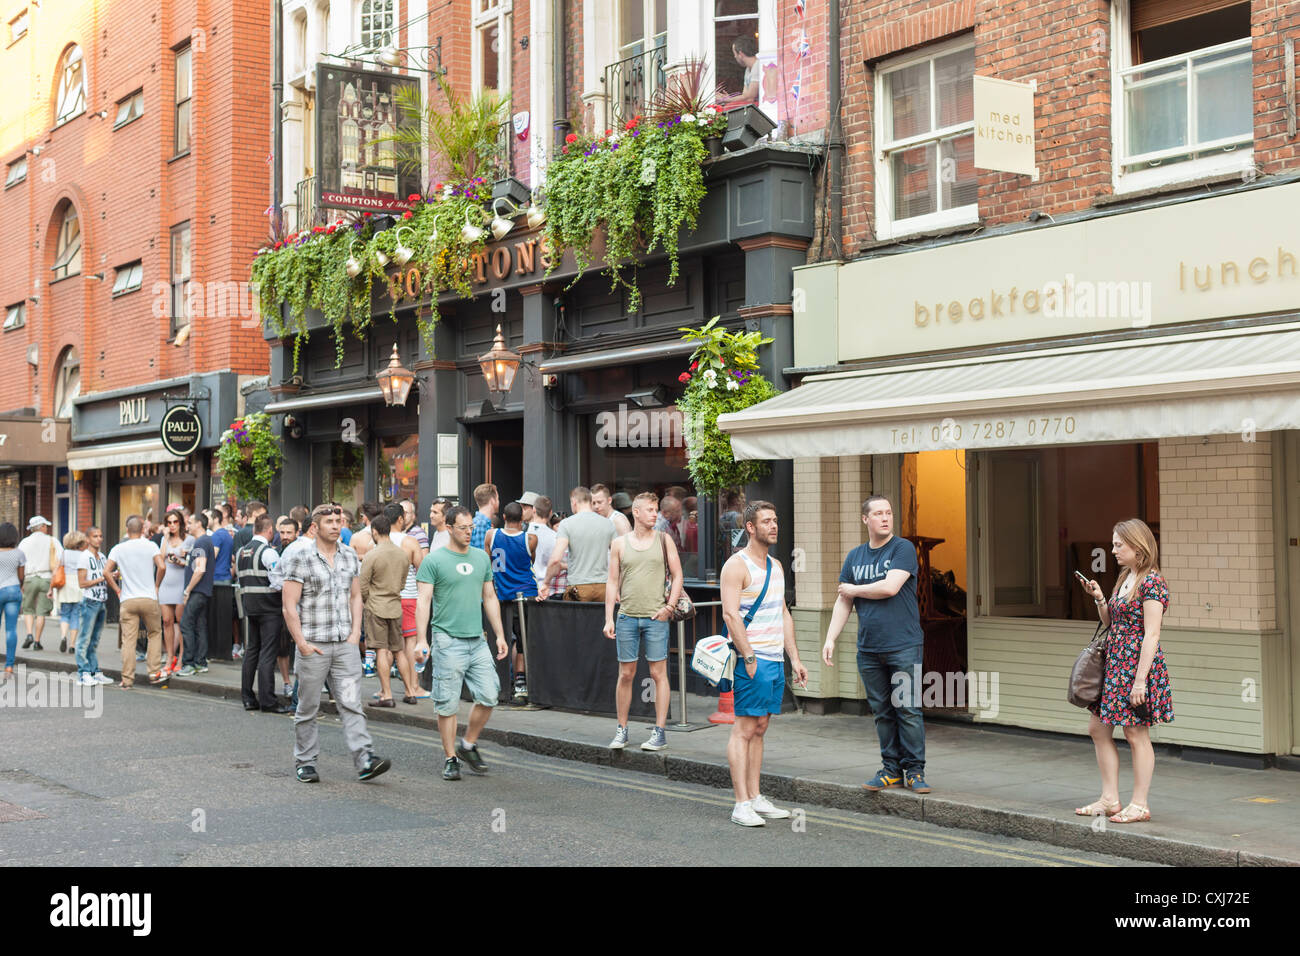 People standing outside the Comptons bar in Soho, London, UK Stock Photo